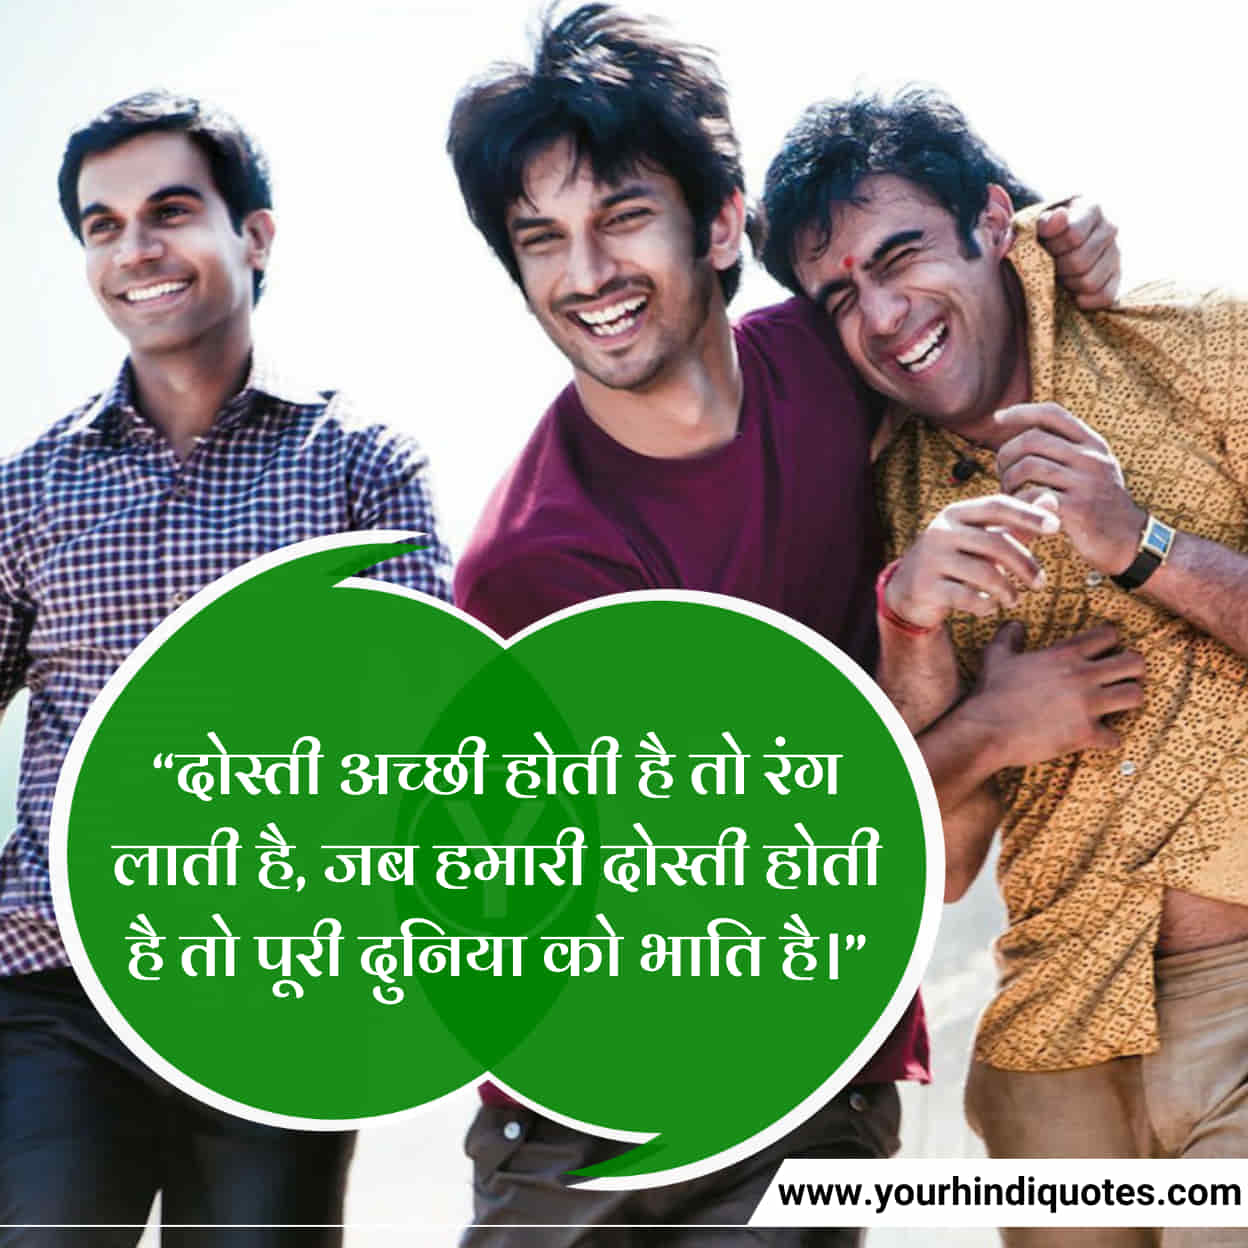 Latest Quotes For Friendship Day